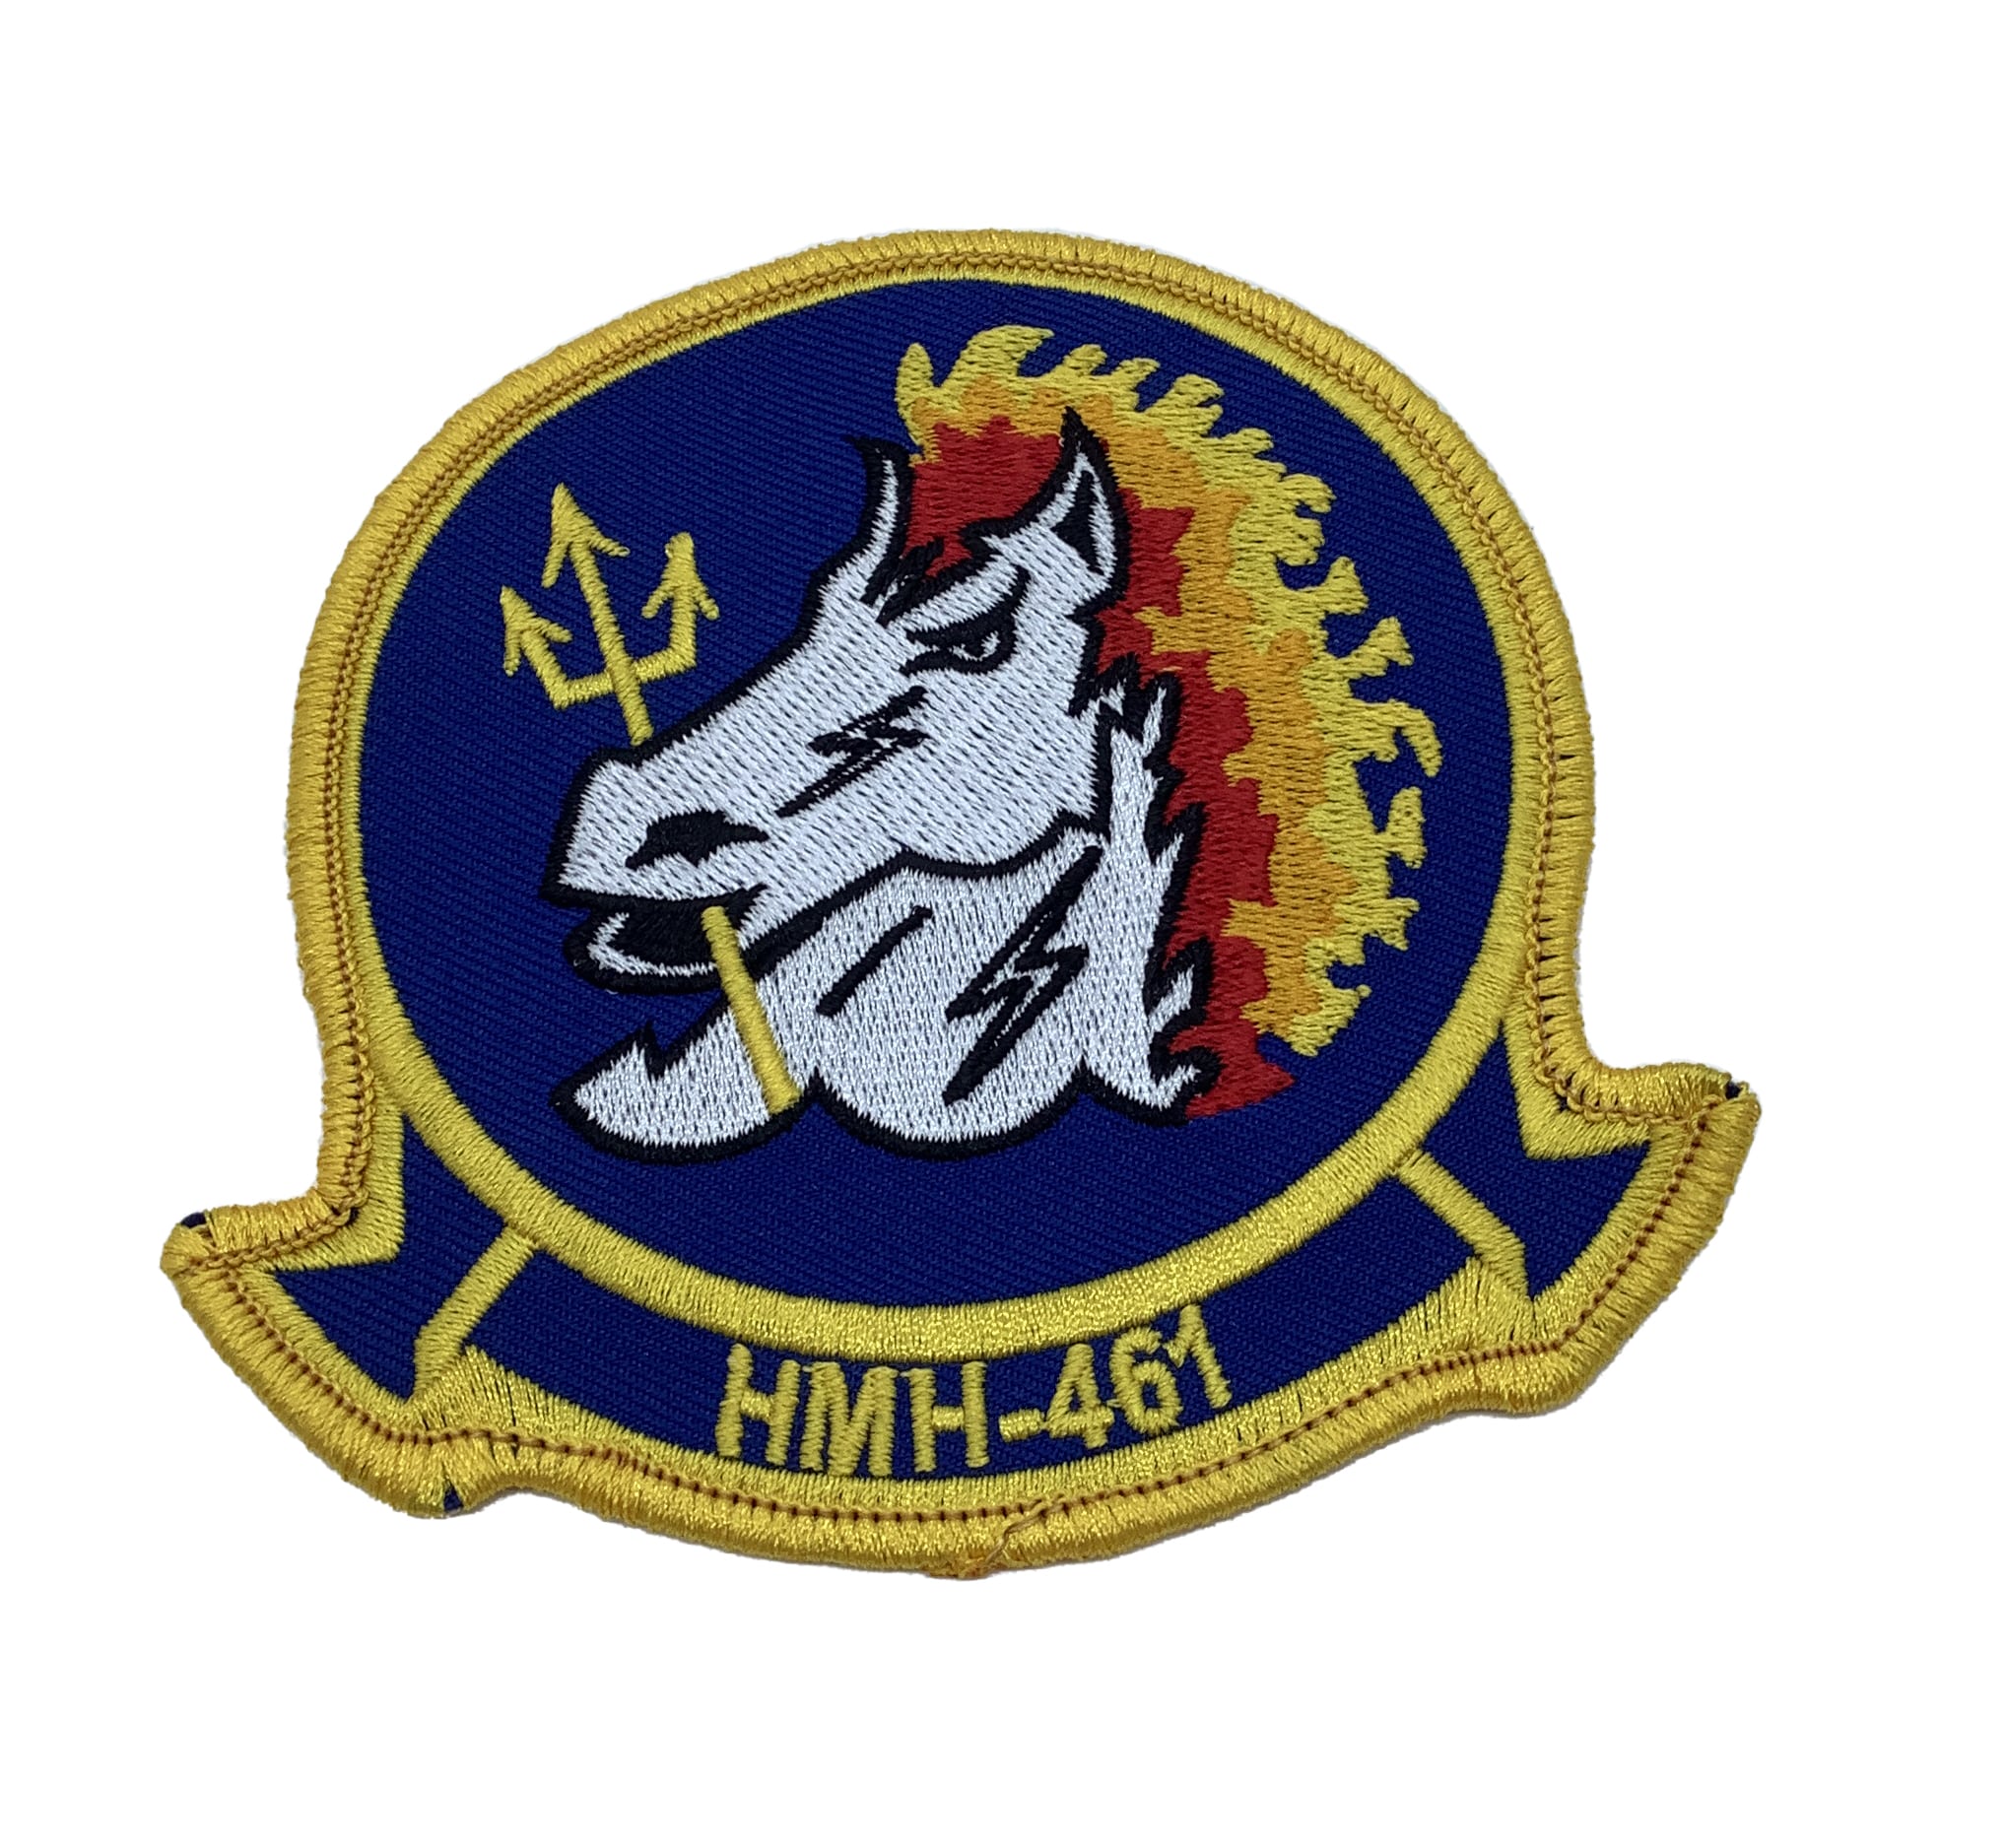 HMH-461 Iron Horse Blue Patch – Plastic Backing